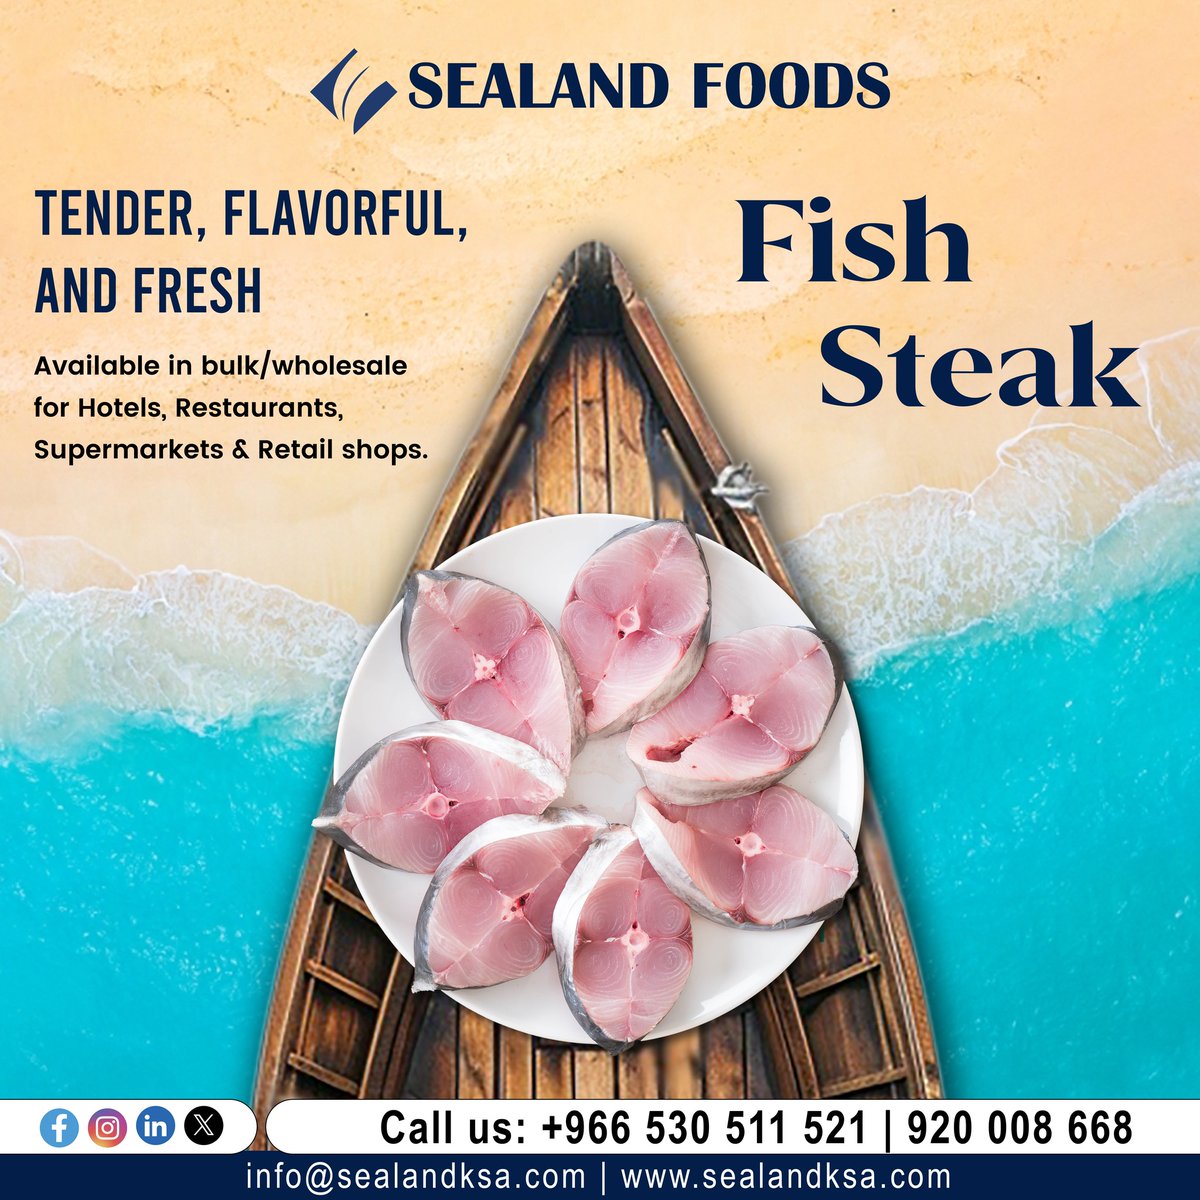 Make waves with our mouthwatering Fish Steak! Succulent, flavorful, and super fresh.
#seafoodlover #sea #finest #Saudiarabia #freshfood #seafood #seafoodies #fresh #healthyfood #steakhouse #fishing #shrimp #crab #Jeddah #tuna #fishingaddict #Arab #fresh #Excellent